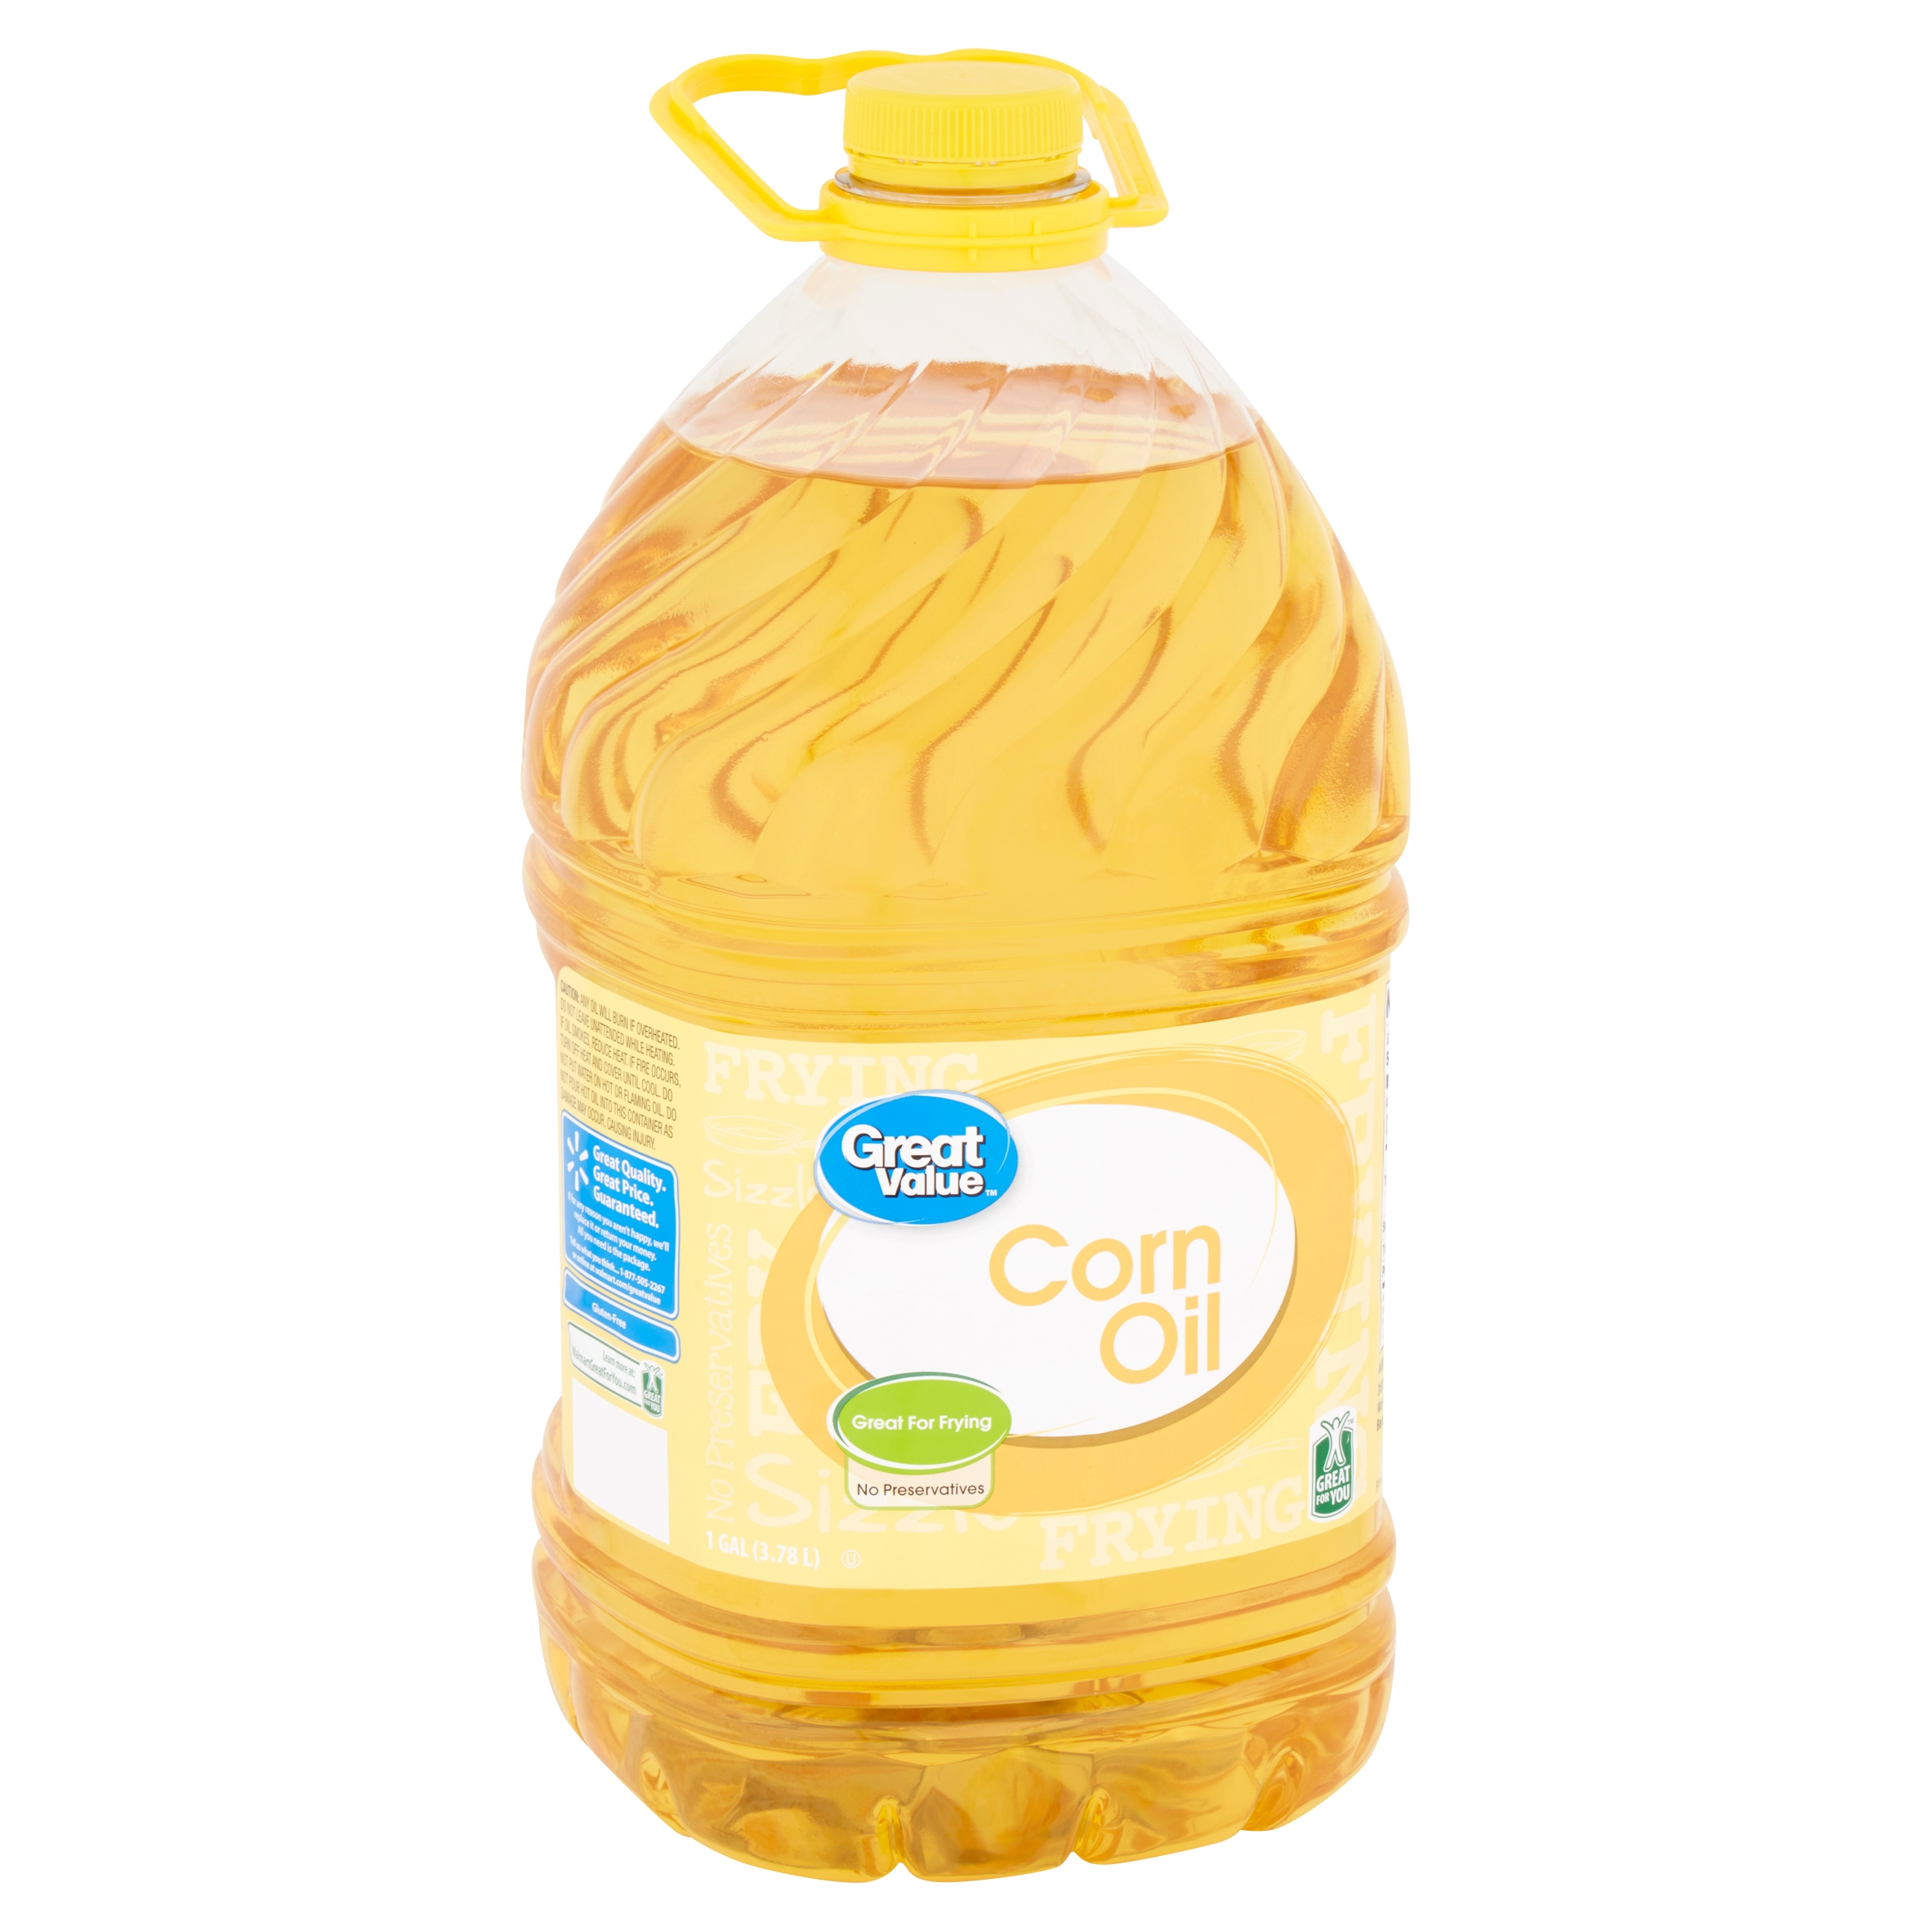 Great Value Corn Oil, 1 Gal Image